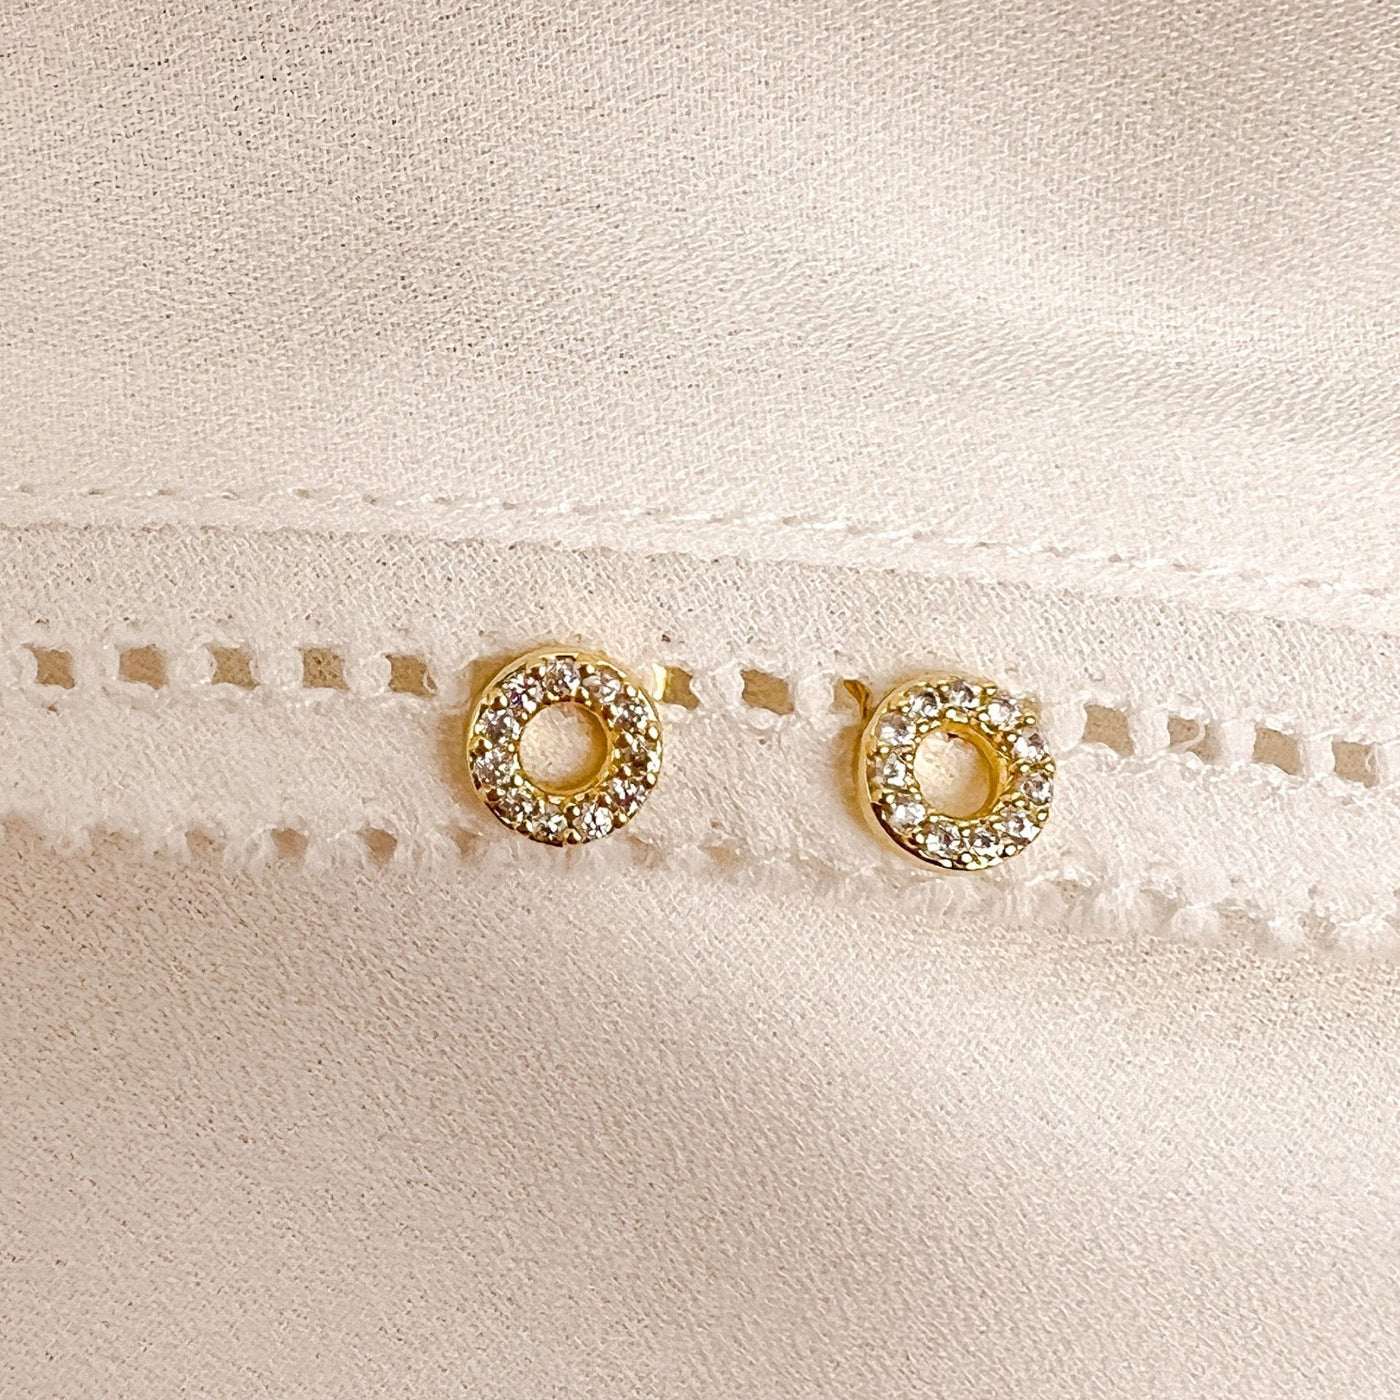 Halo Circle Cubic Zirconia Stud Earrings in Gold